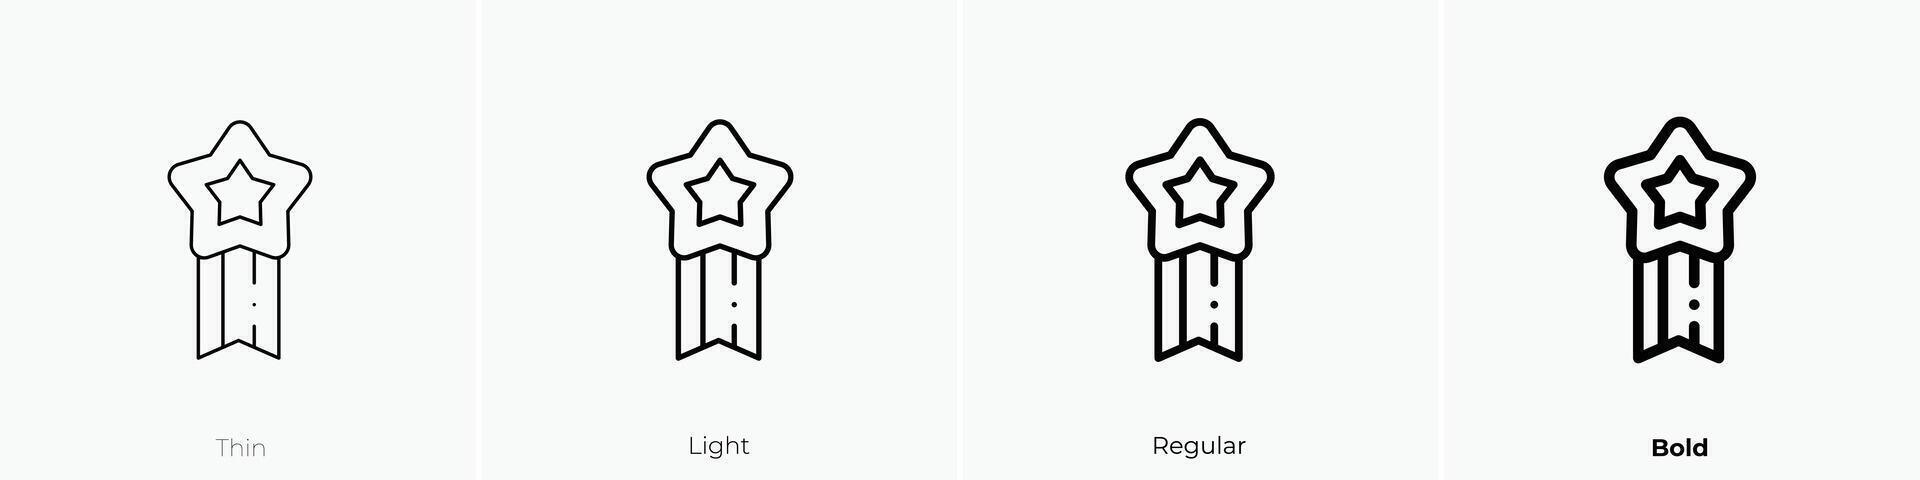 medal icon. Thin, Light, Regular And Bold style design isolated on white background vector